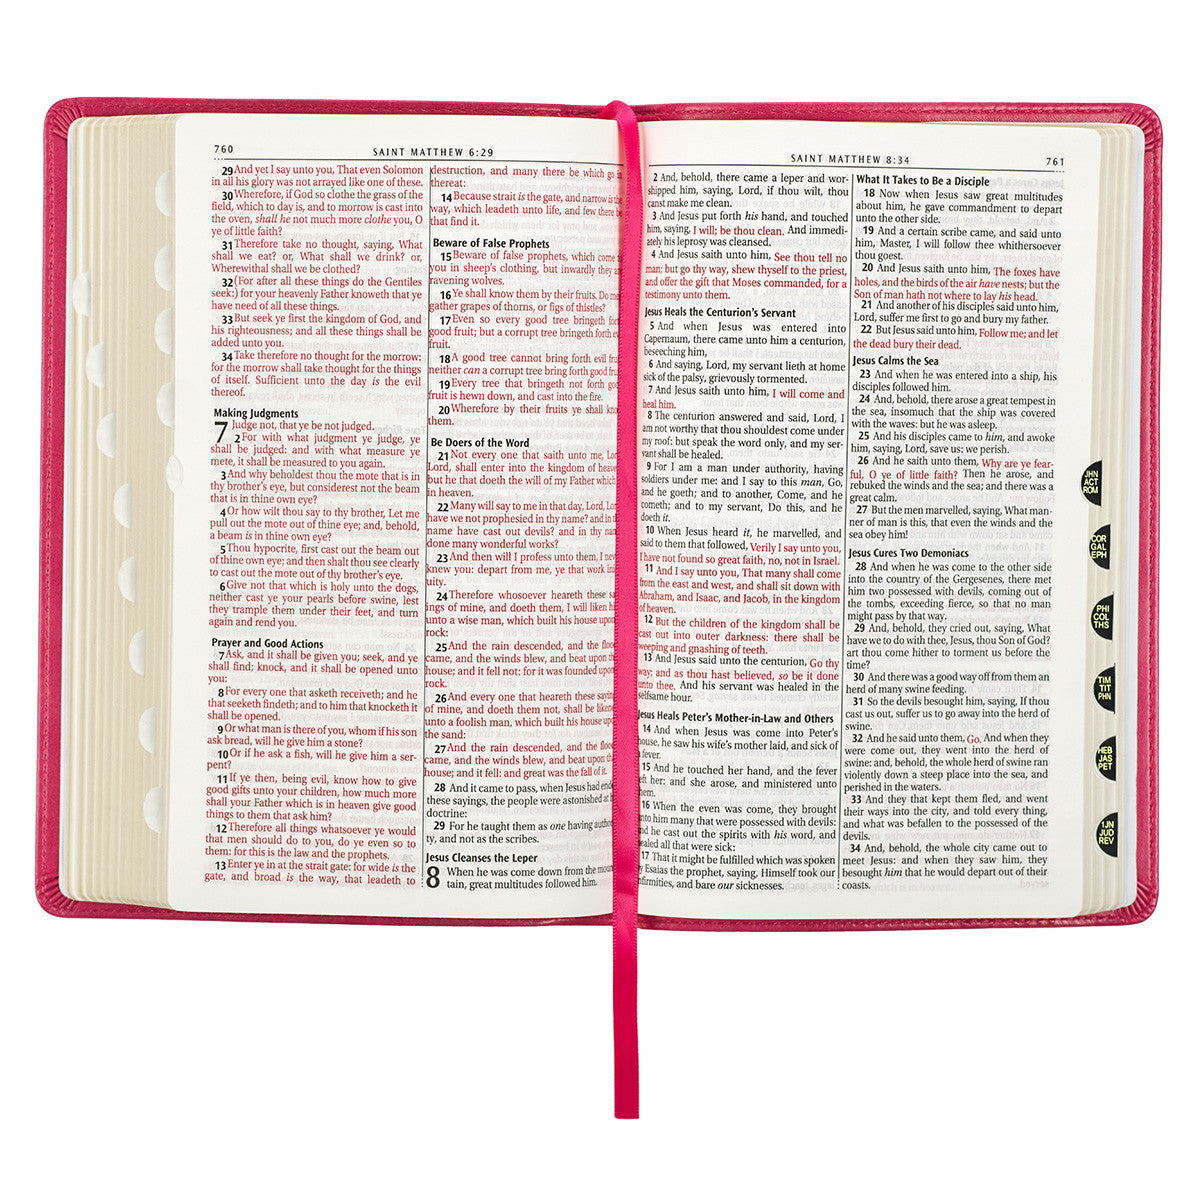 Pink Thumb Index KJV Gift Deluxe Bible